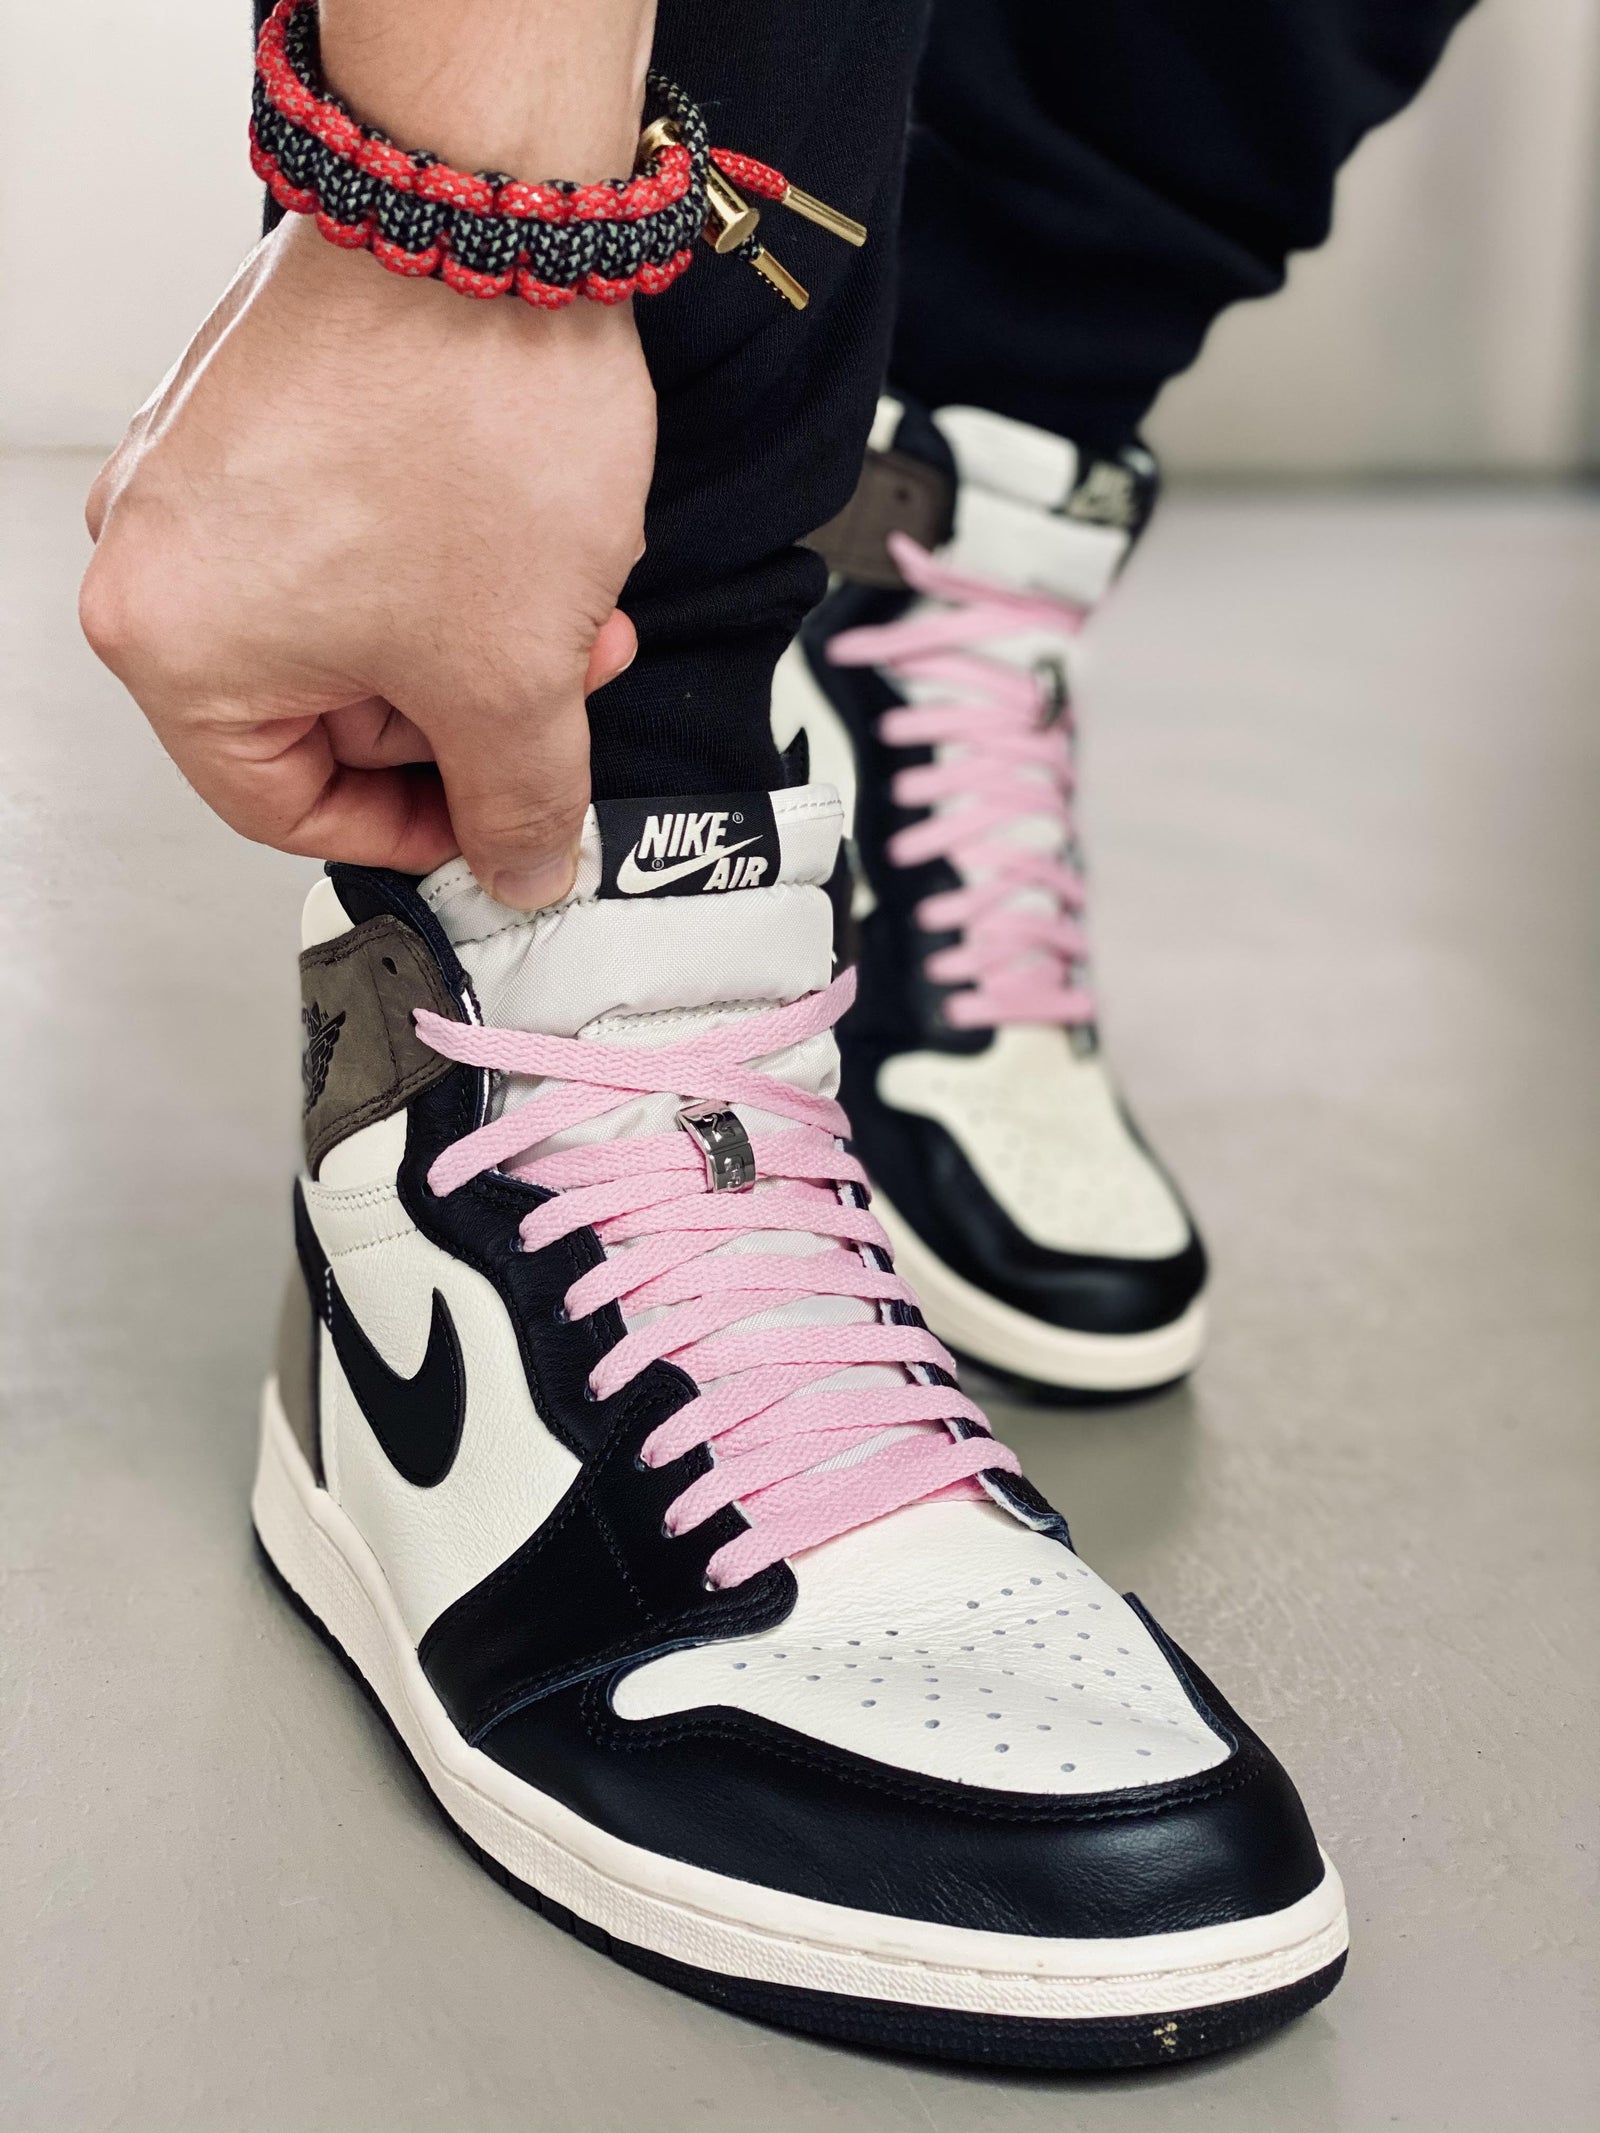 shoe laces for the NIKE Air 